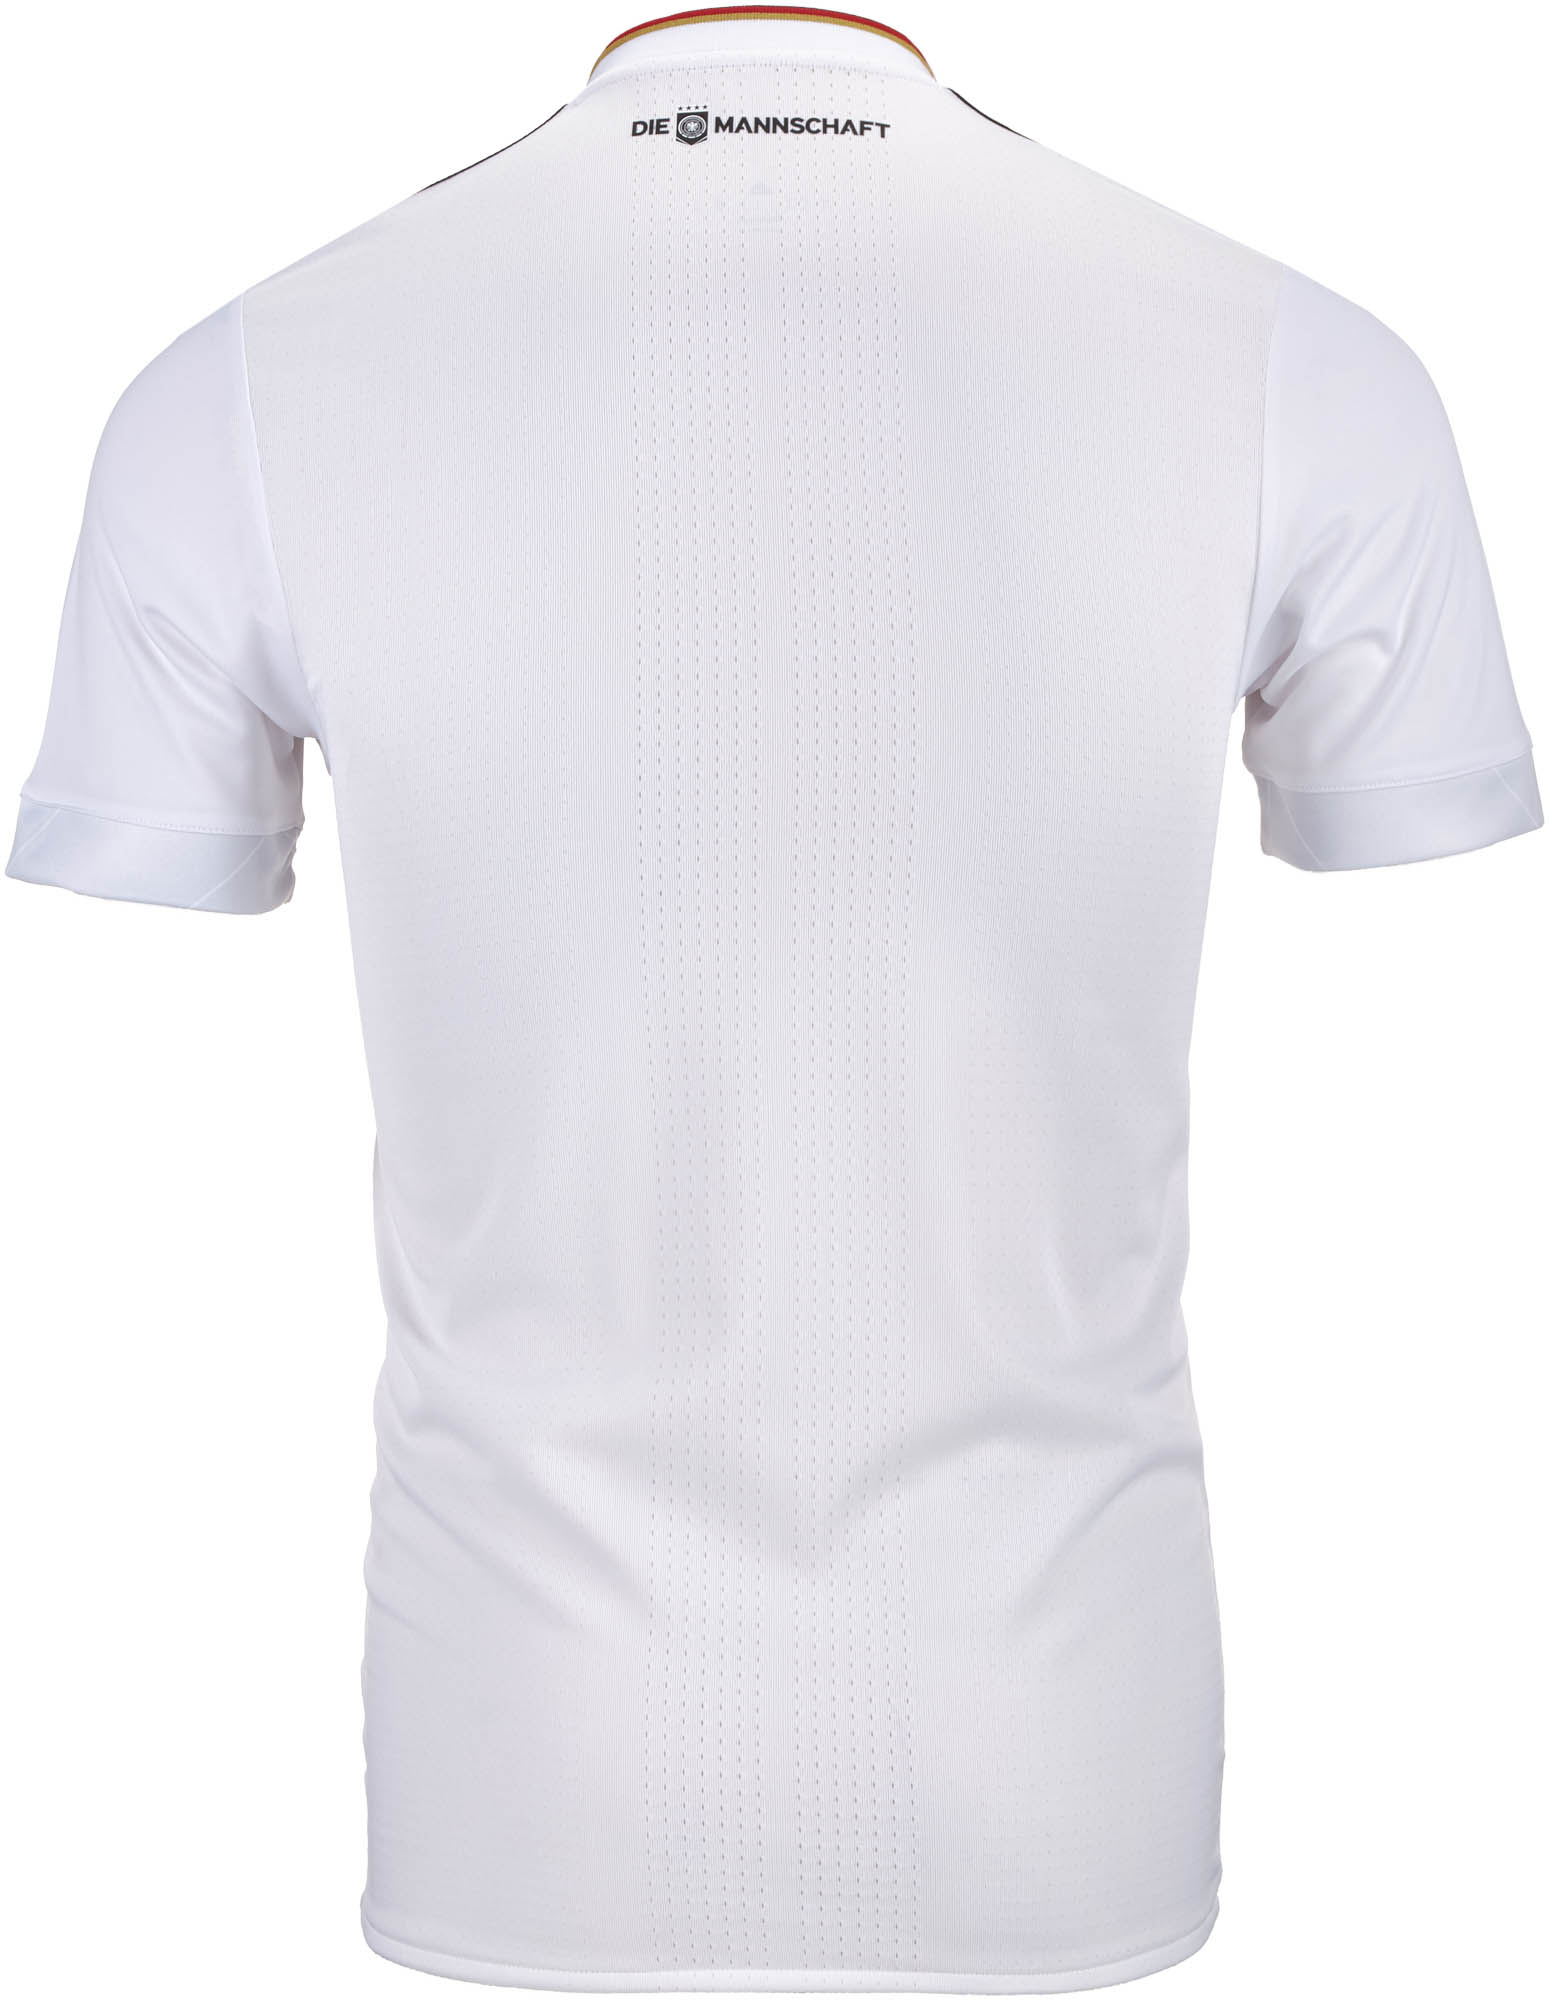 Adidas Men's Football Germany Home Jersey (BR7843_White